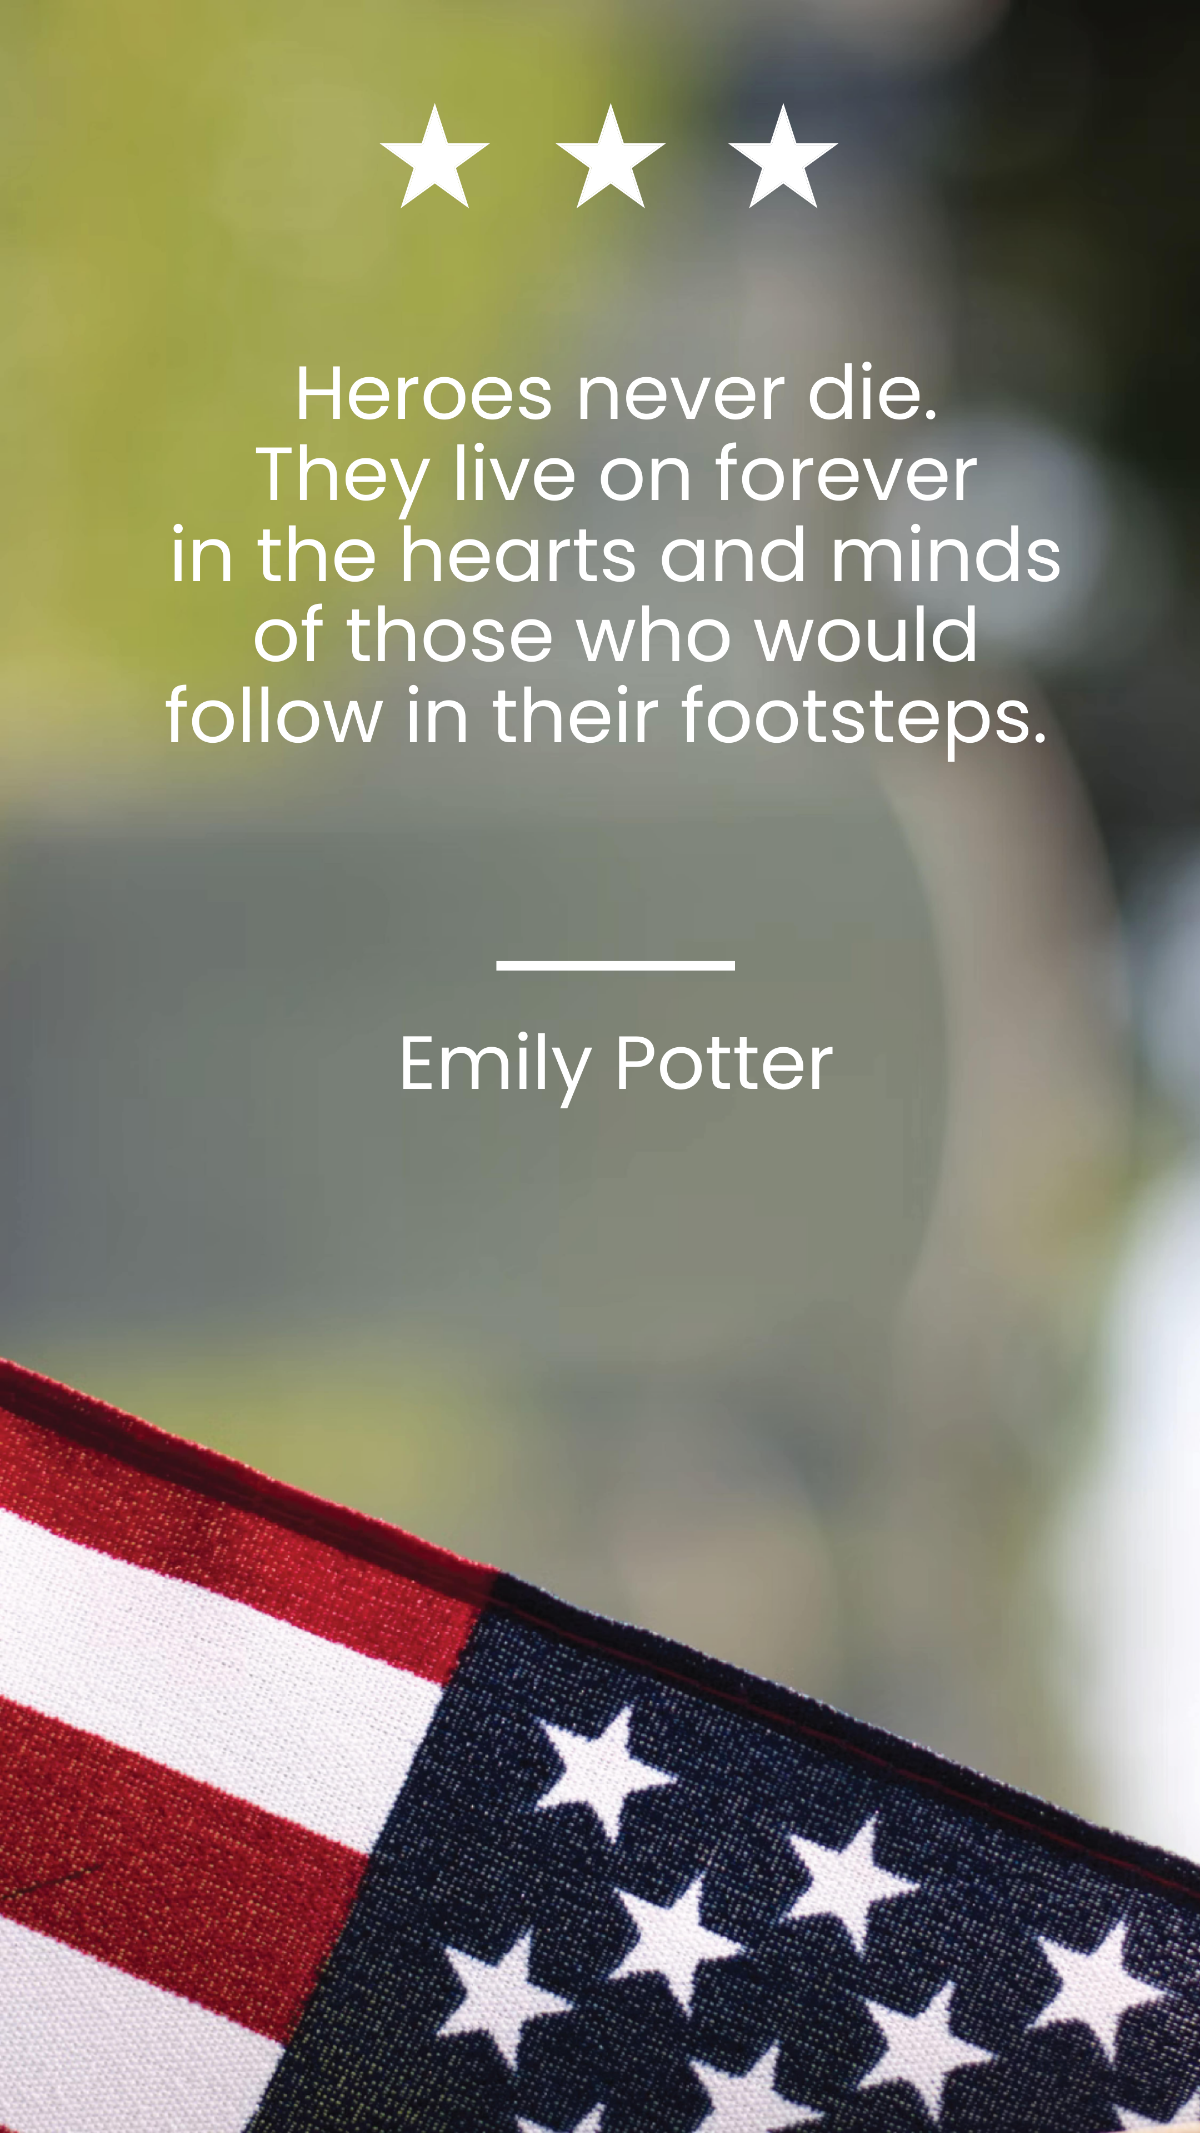 Emily Potter - Heroes never die. They live on forever in the hearts and minds of those who would follow in their footsteps. Template